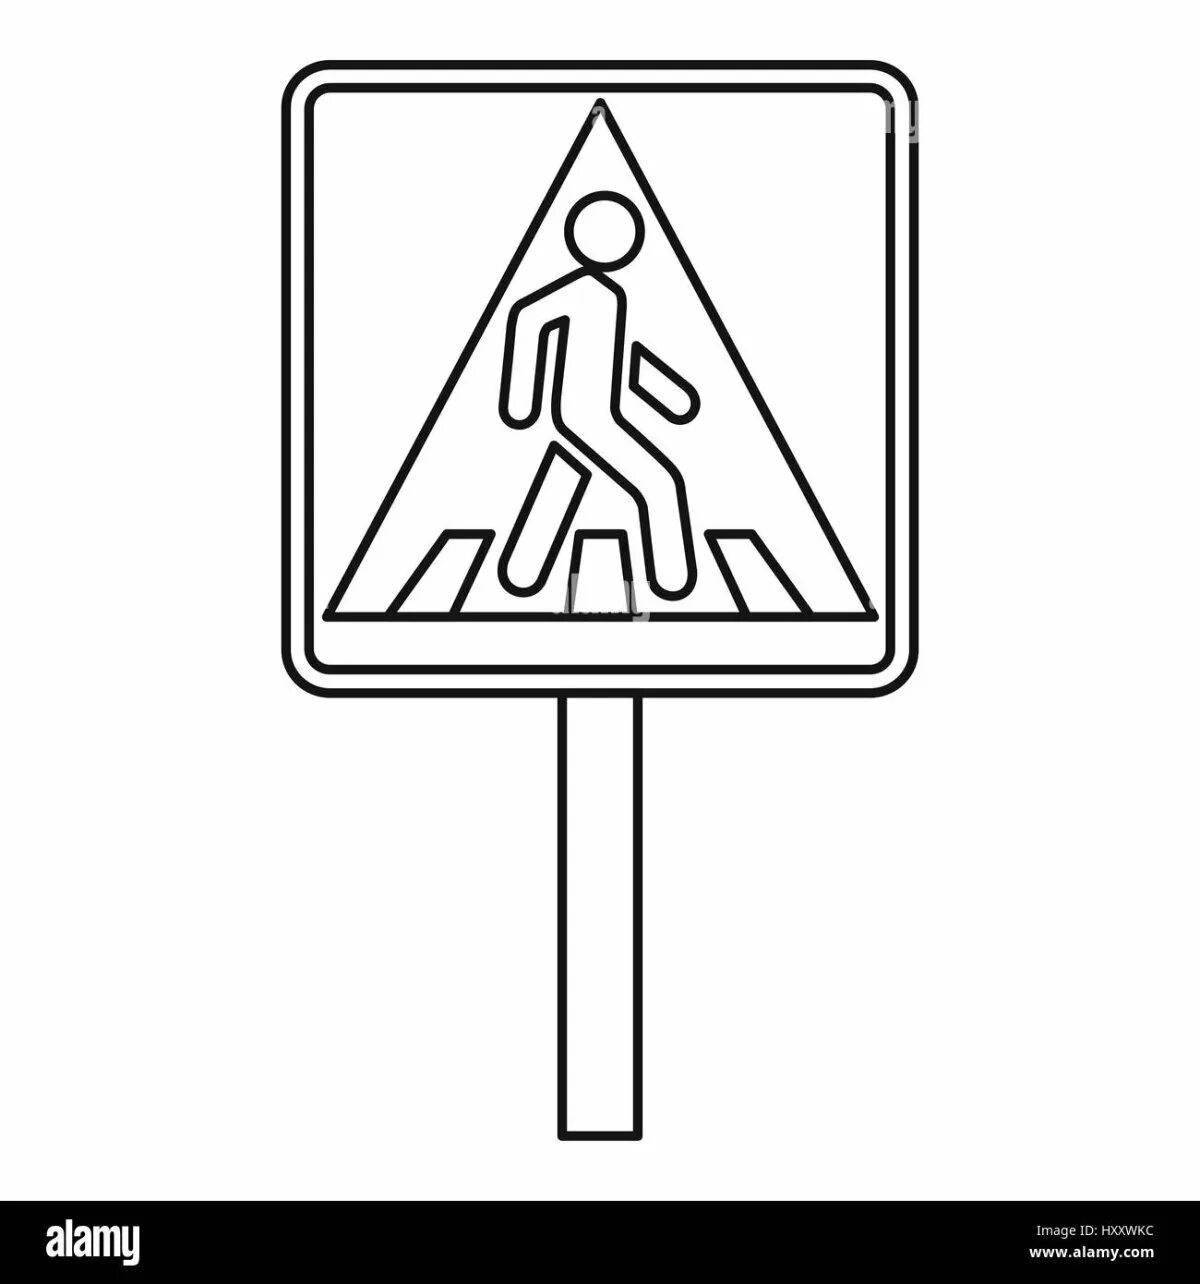 Coloring page funny pedestrian signs